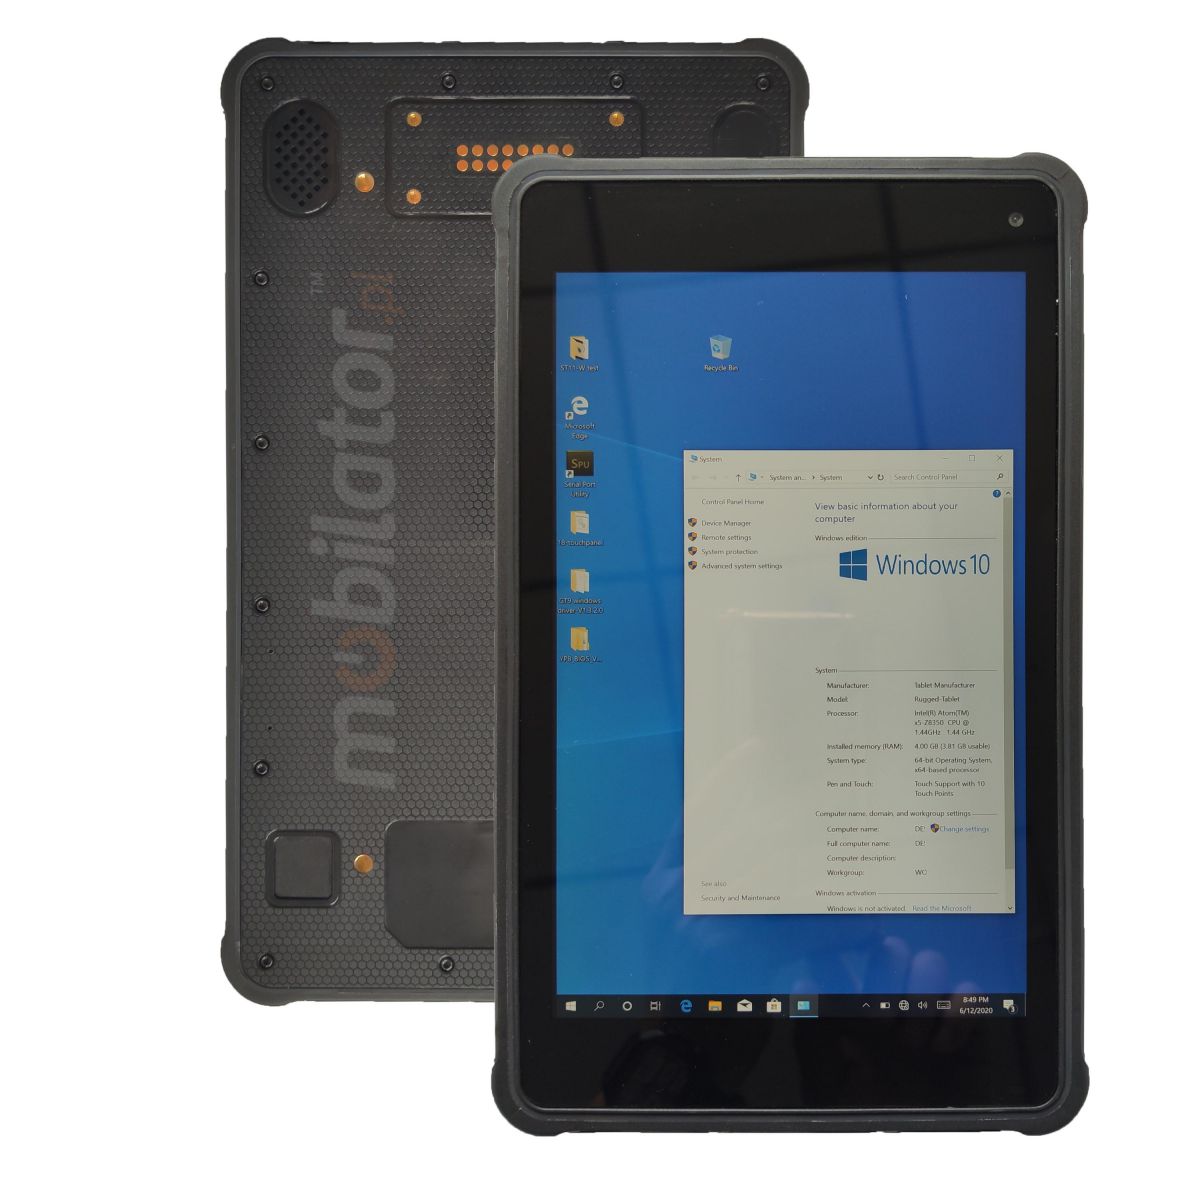 Shockproof industrial tablet with Honeywell N3680 2D code scanner and UHF RFID reader, high-precision GPS, NFC, 4G and Bluetooth 4.0, 4GB RAM memory and 64GB disk - MobiPad ST800B v.11 